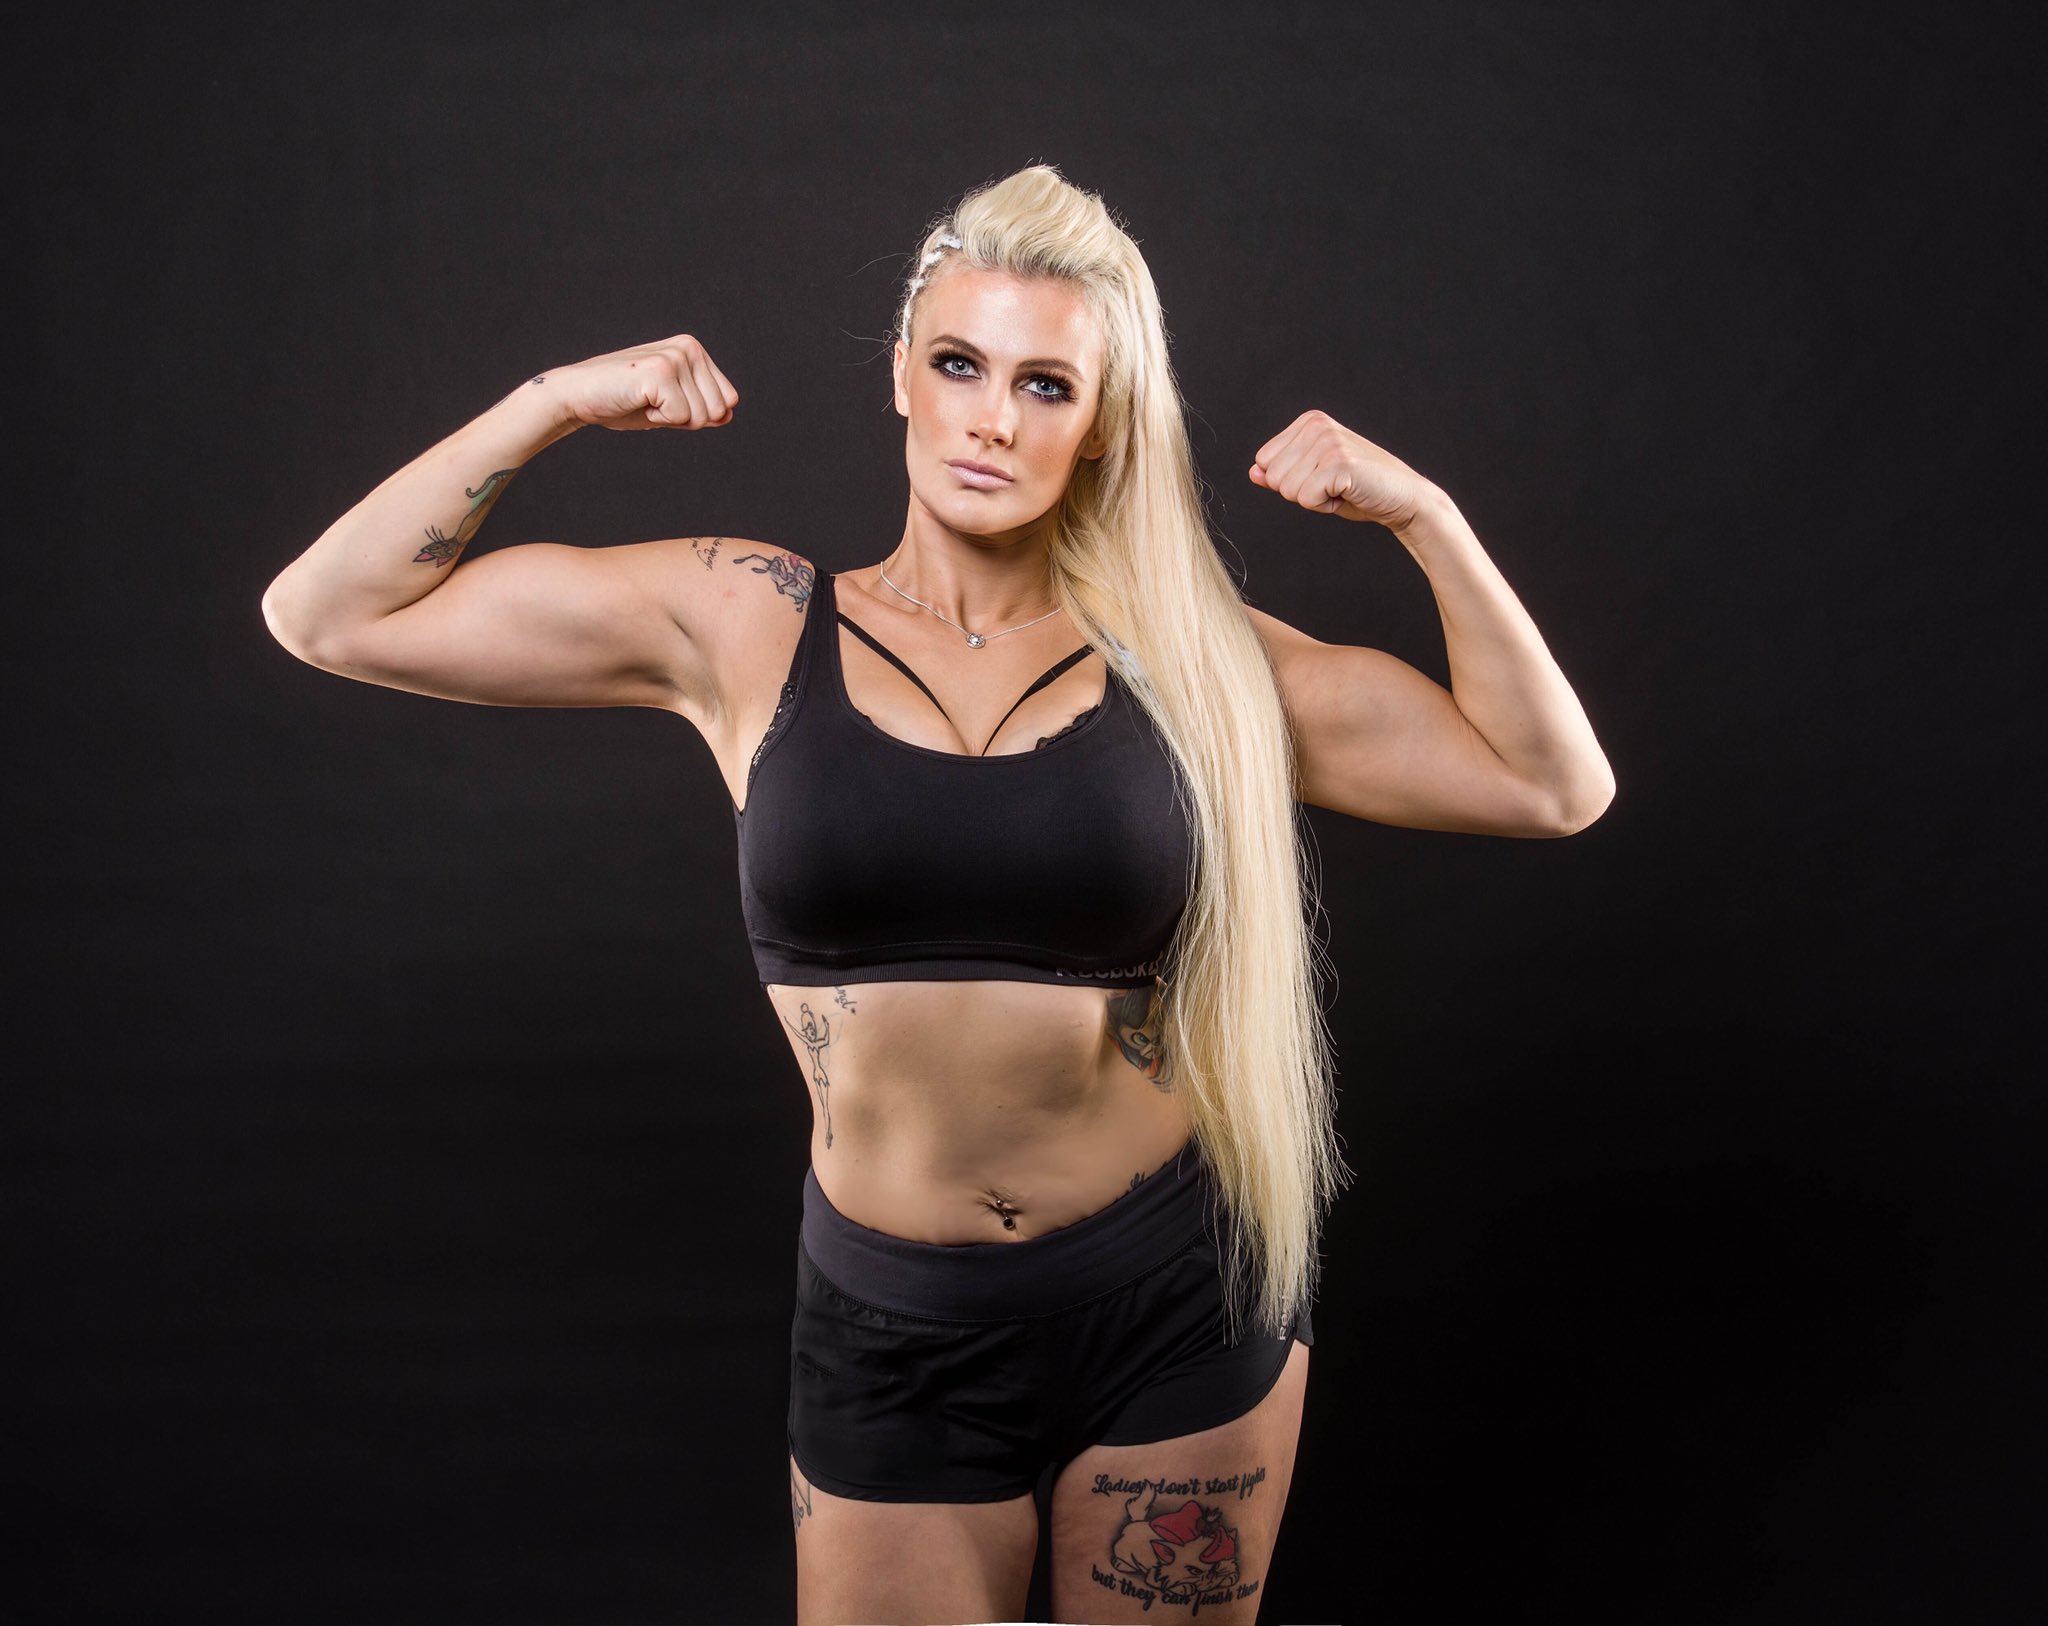 Former Ufc Fighter Cindy Dandois Launches Onlyfans